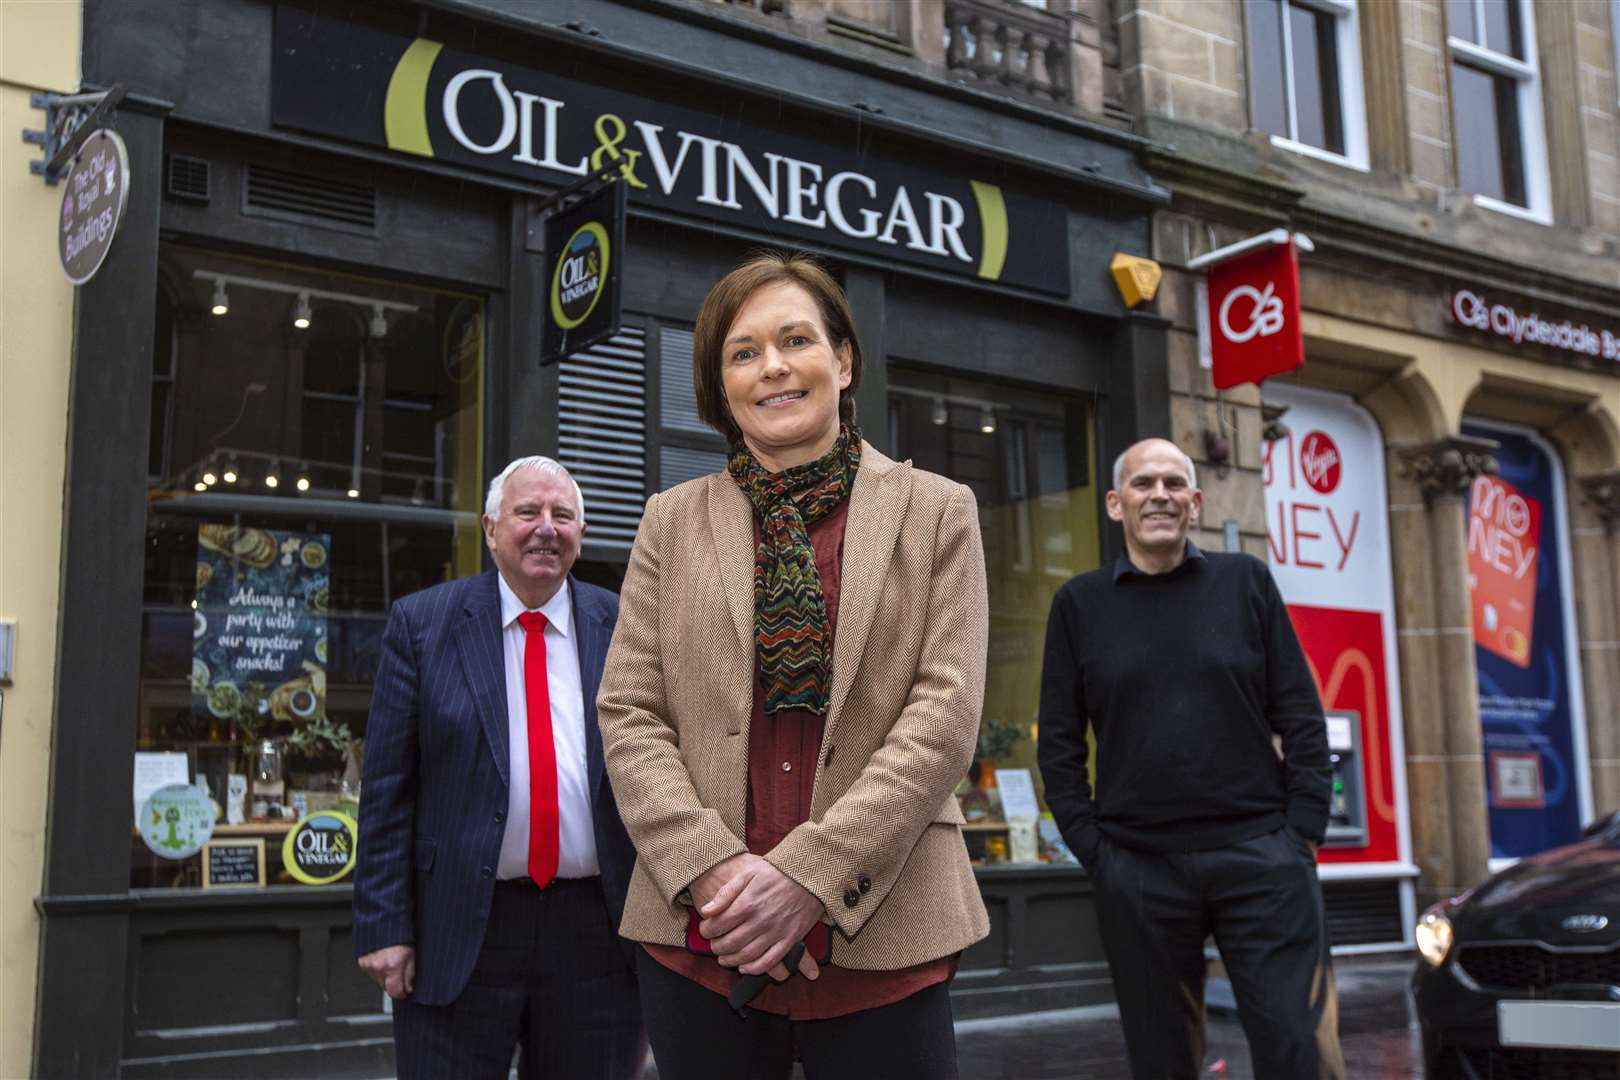 Inverness Business Improvement District (BID) is named as a High Street Heroes Regional Award runner up in the Scotland Loves Local campaign. From left, Mike Smith (Inverness BID Manager), Margaret Laws (Inverness BID Communications Manager) and Colin Craig (Inverness BID Vice-Chair and owner of Oil & Vinegar in Inverness).